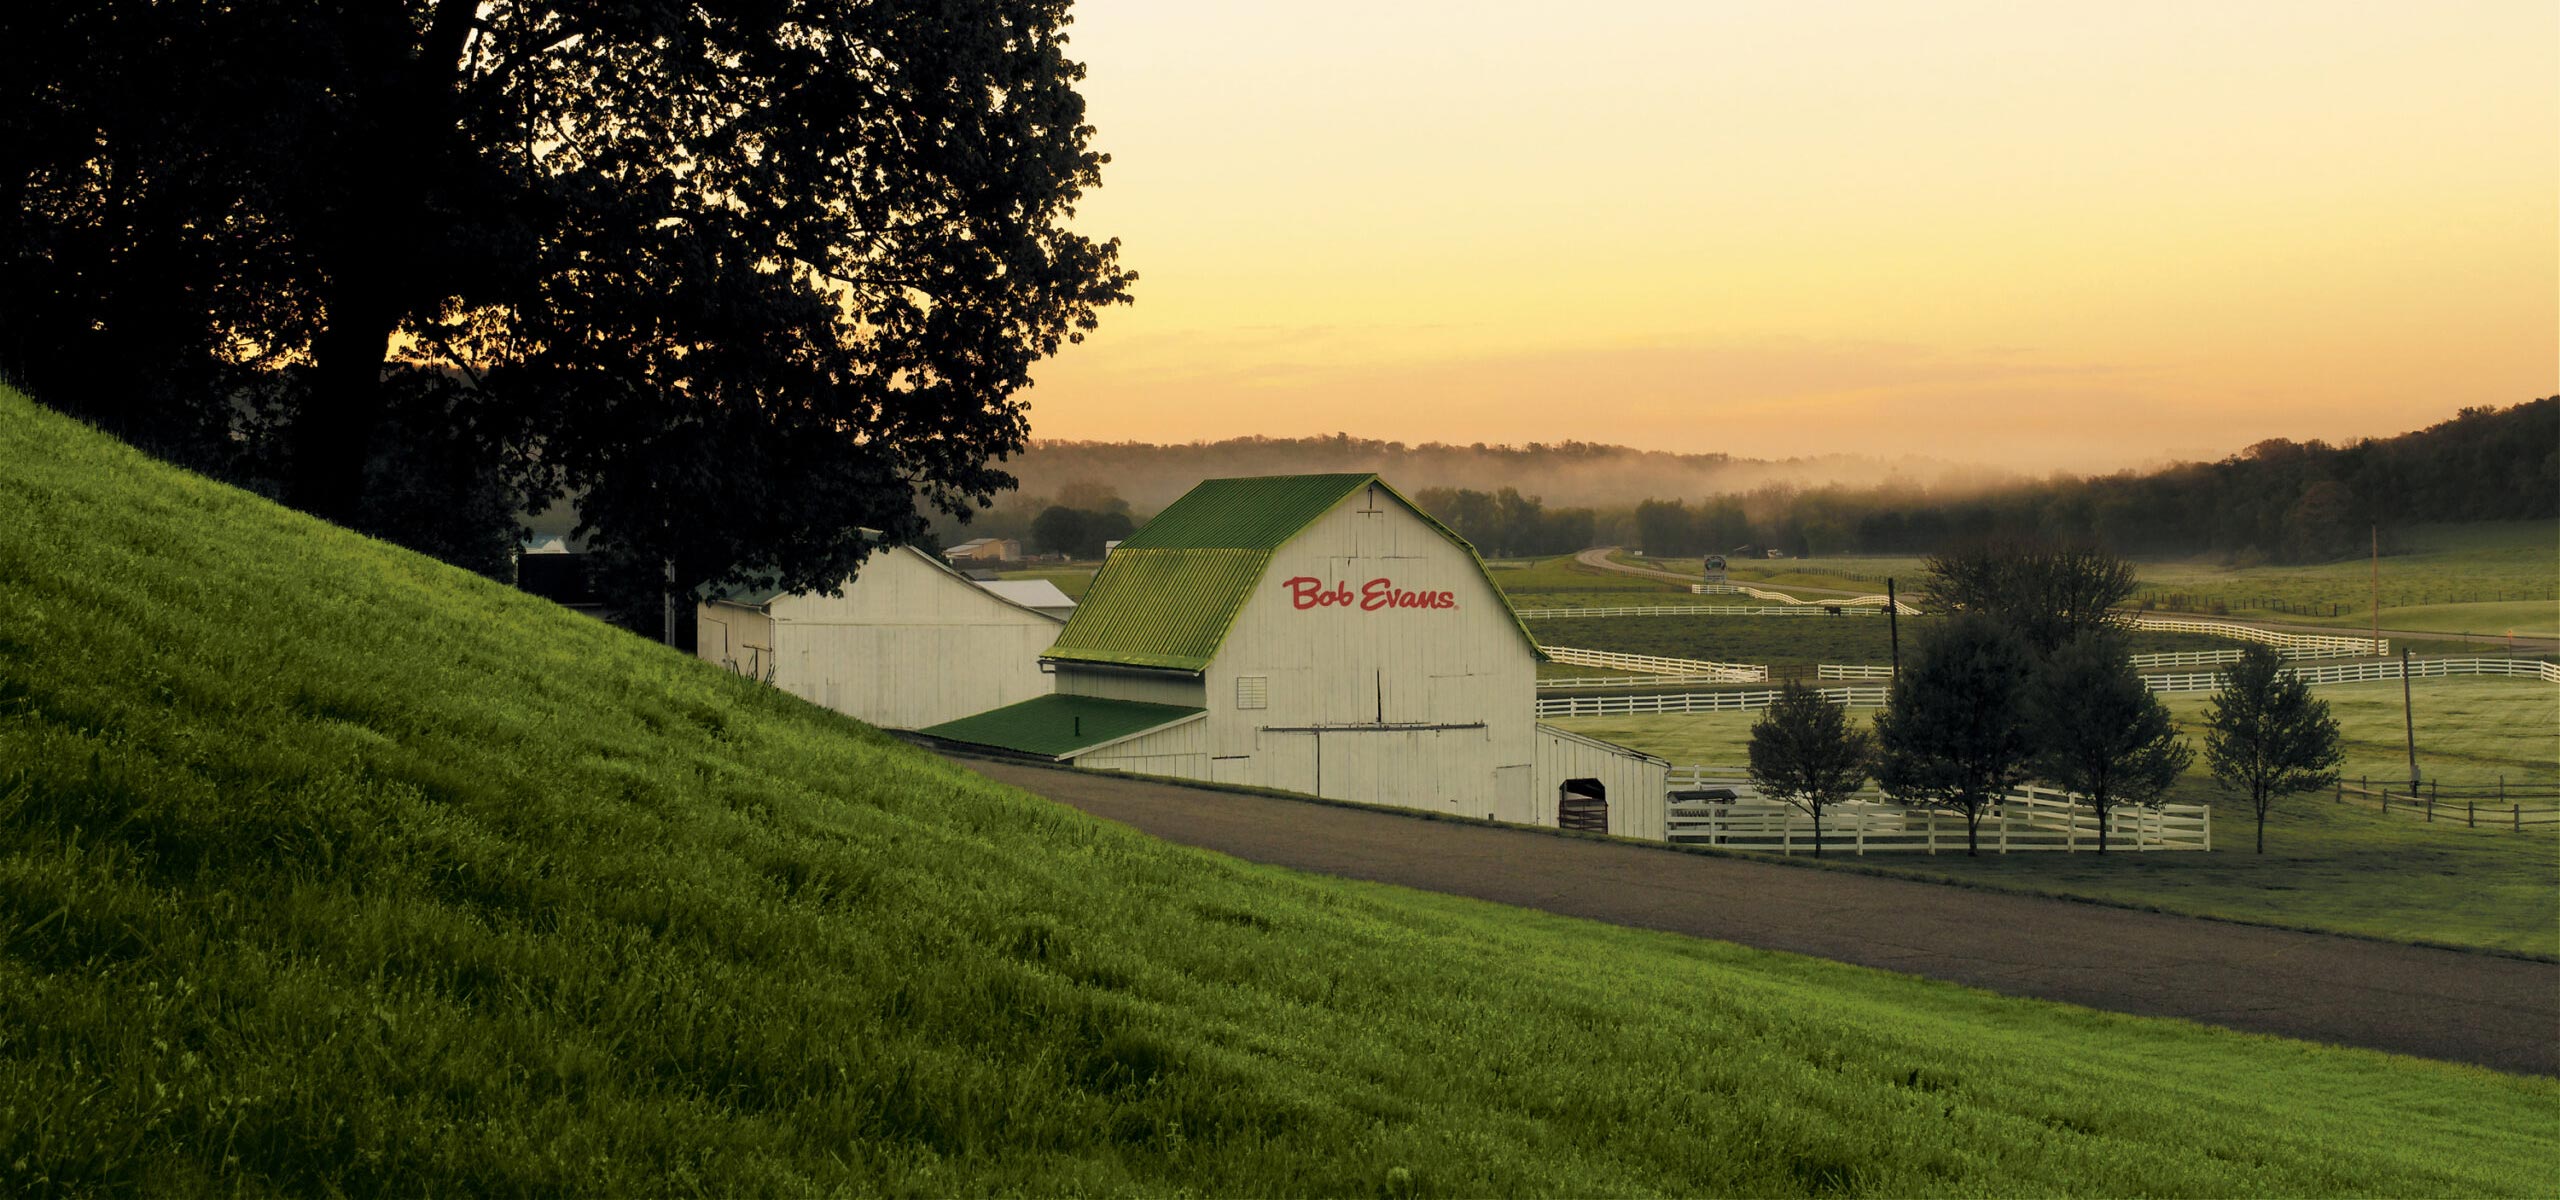 Photo of farm with a barn with Bob Evans logo on the side